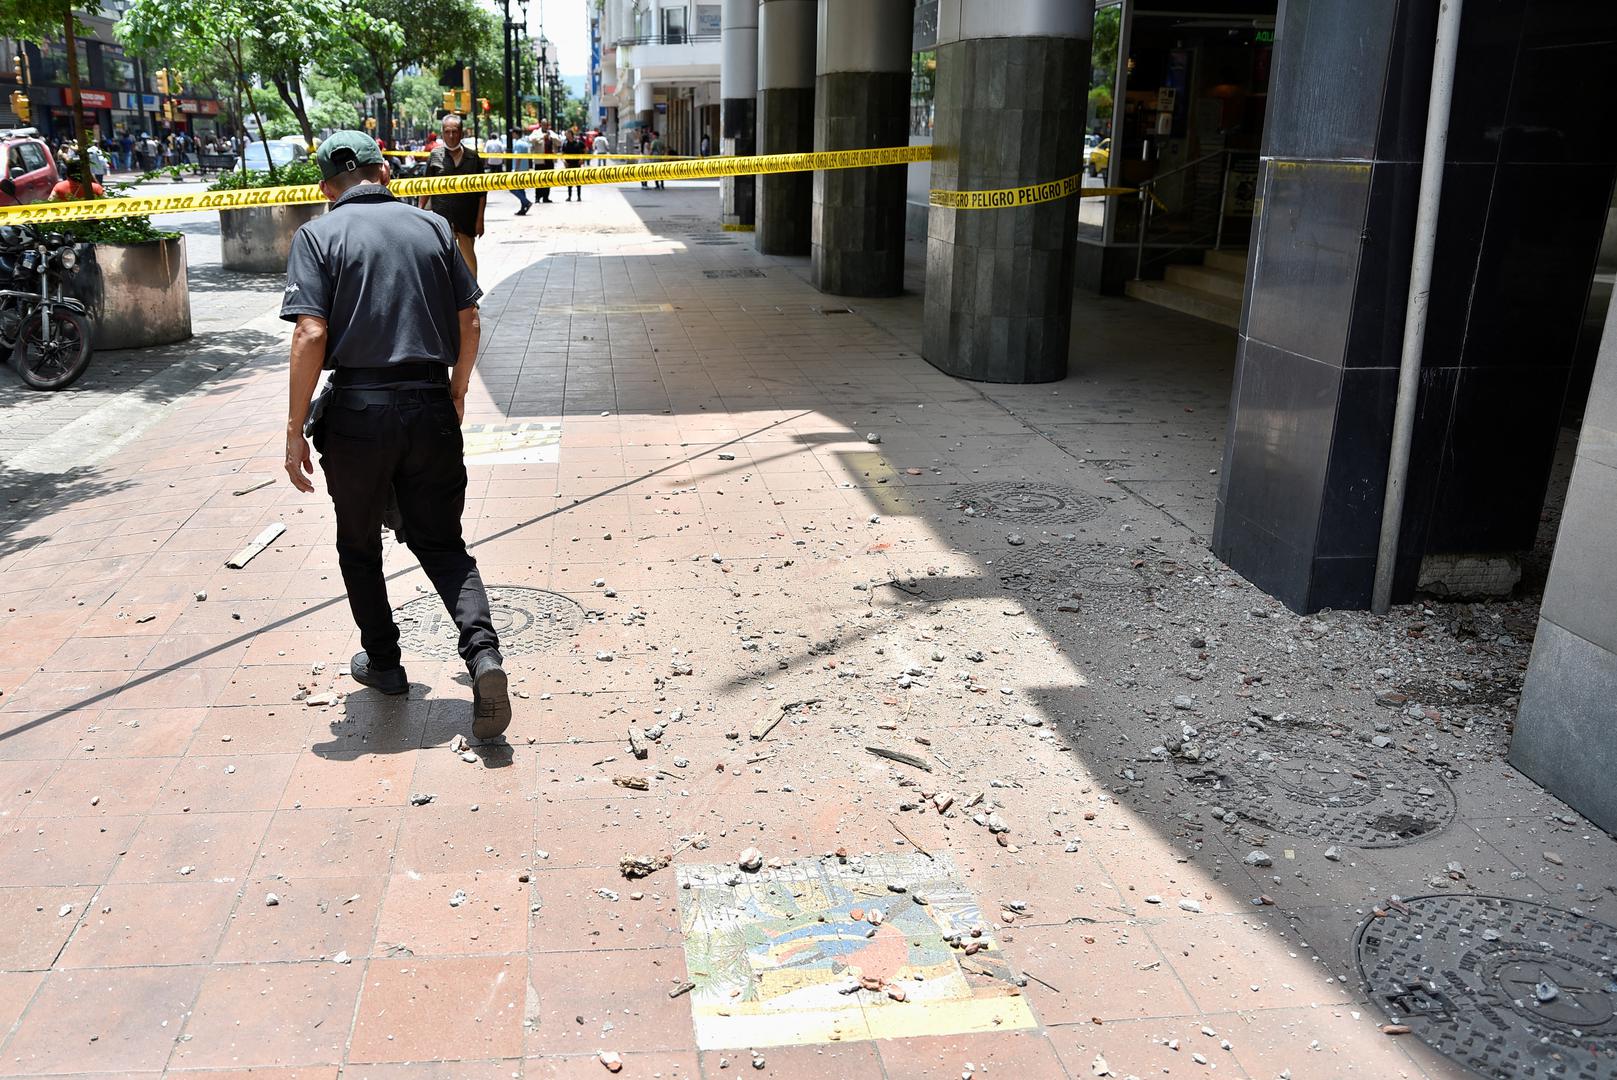 A man passes by debris following an earthquake in Guayaquil, Ecuador March 18, 2023. REUTERS/Vicente Gaibor Del Pino Photo: VICENTE GAIBOR DEL PINO/REUTERS